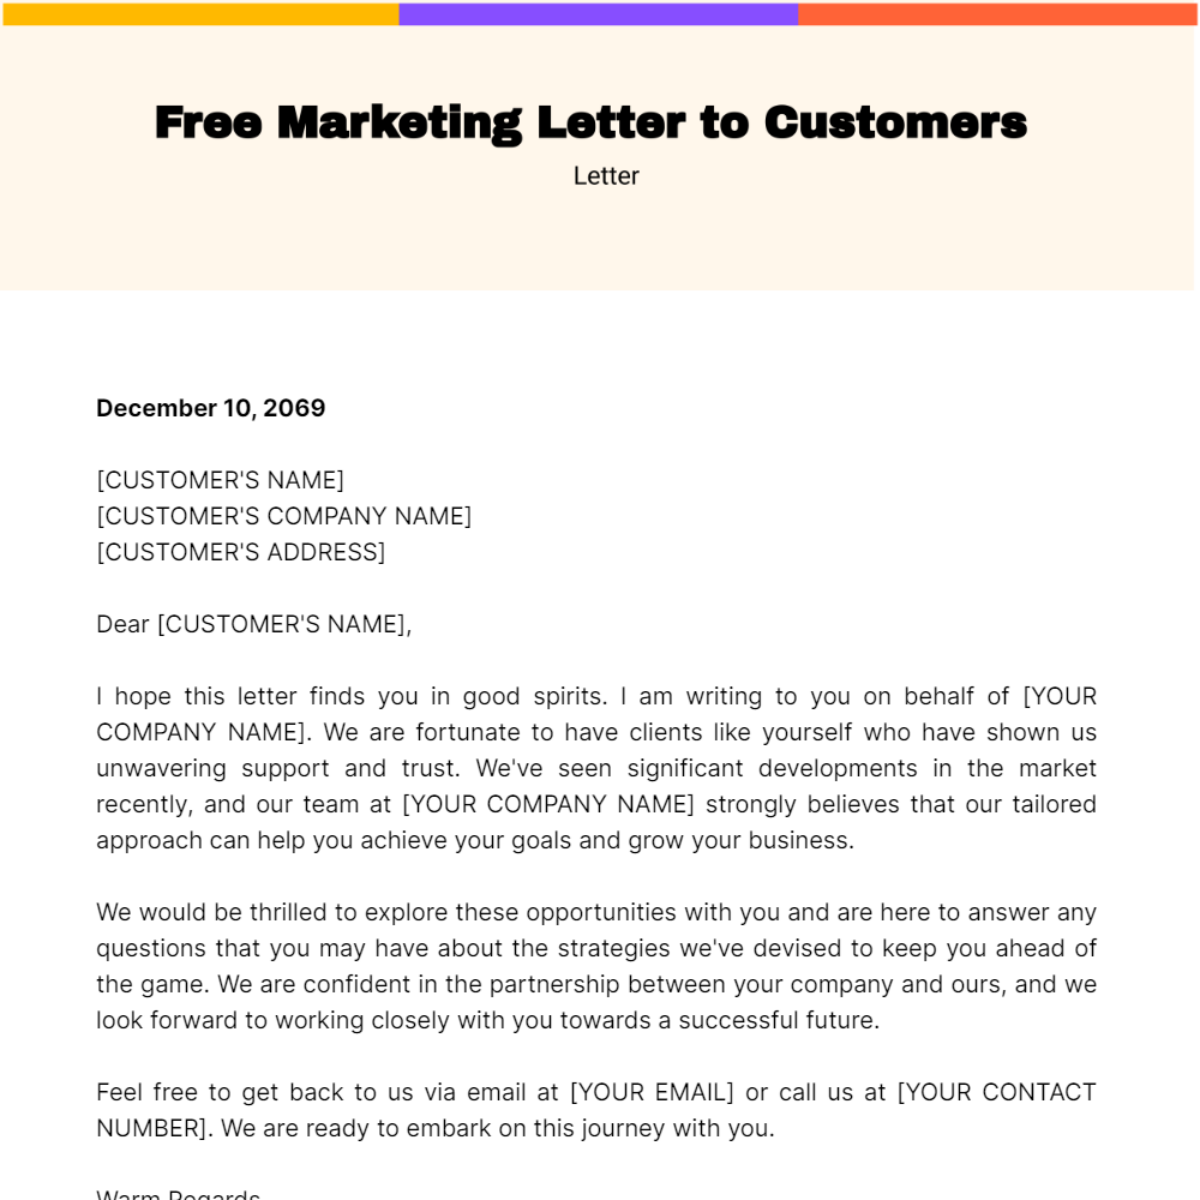 Marketing Letter to Customers Template